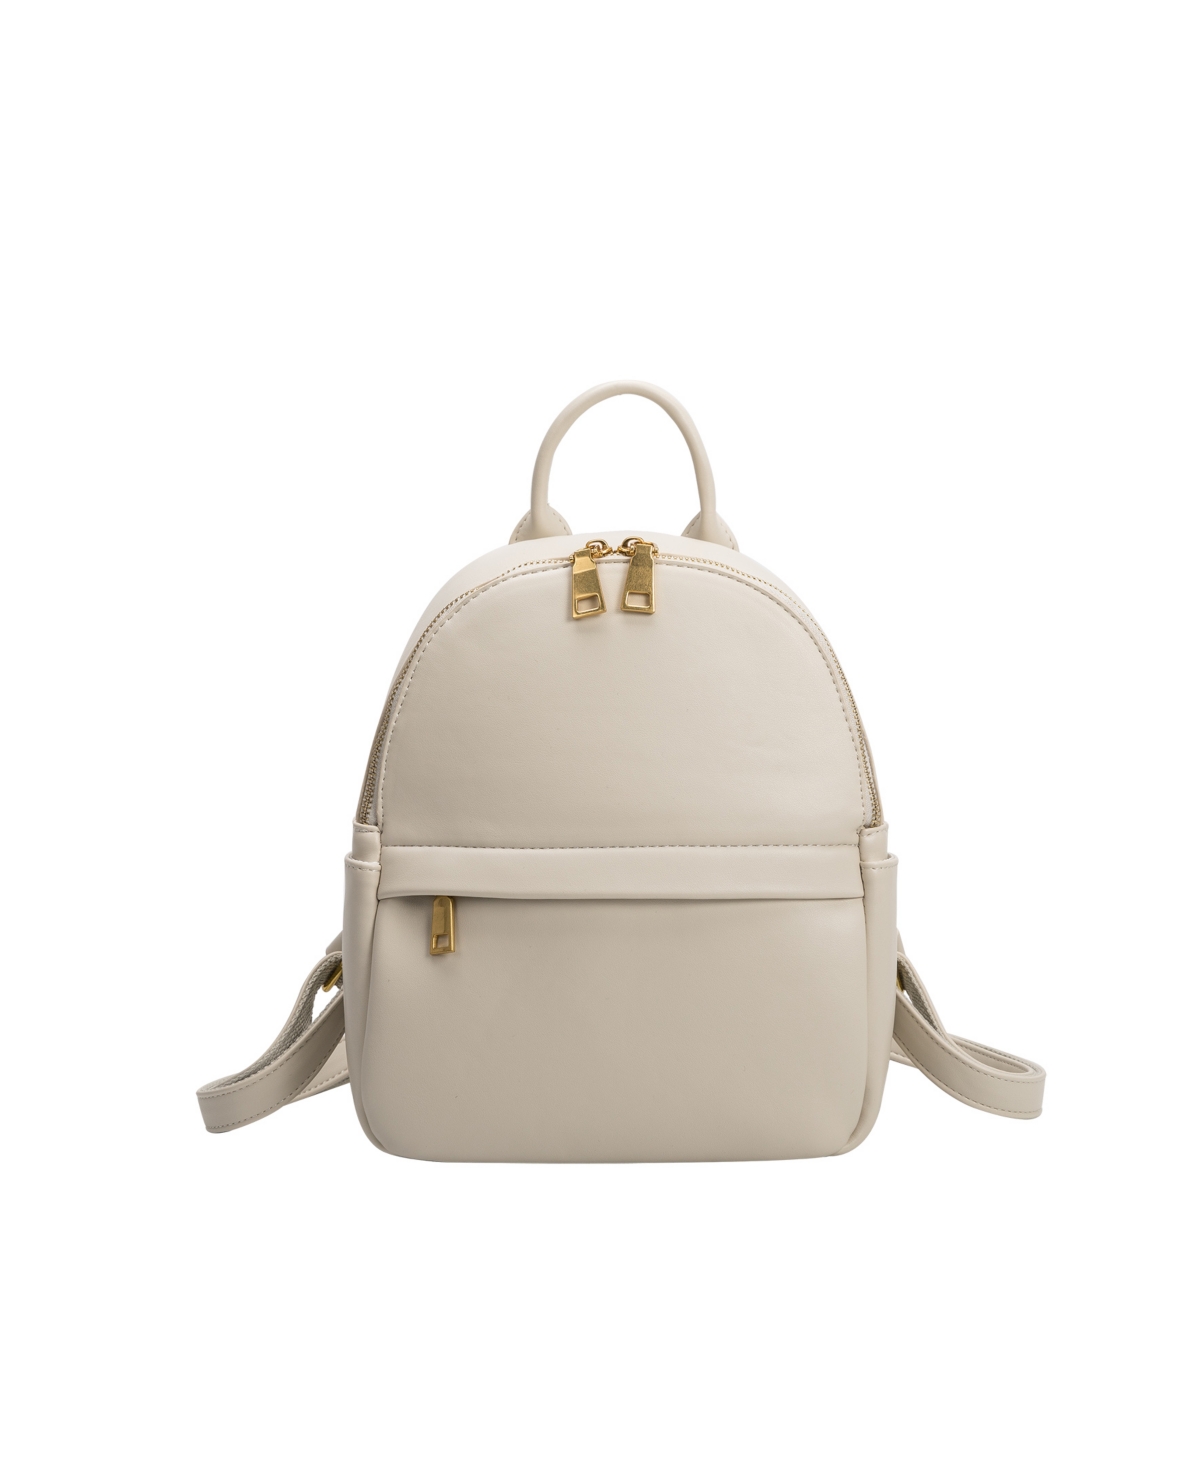 Melie Bianco Women's Louise Small Backpack